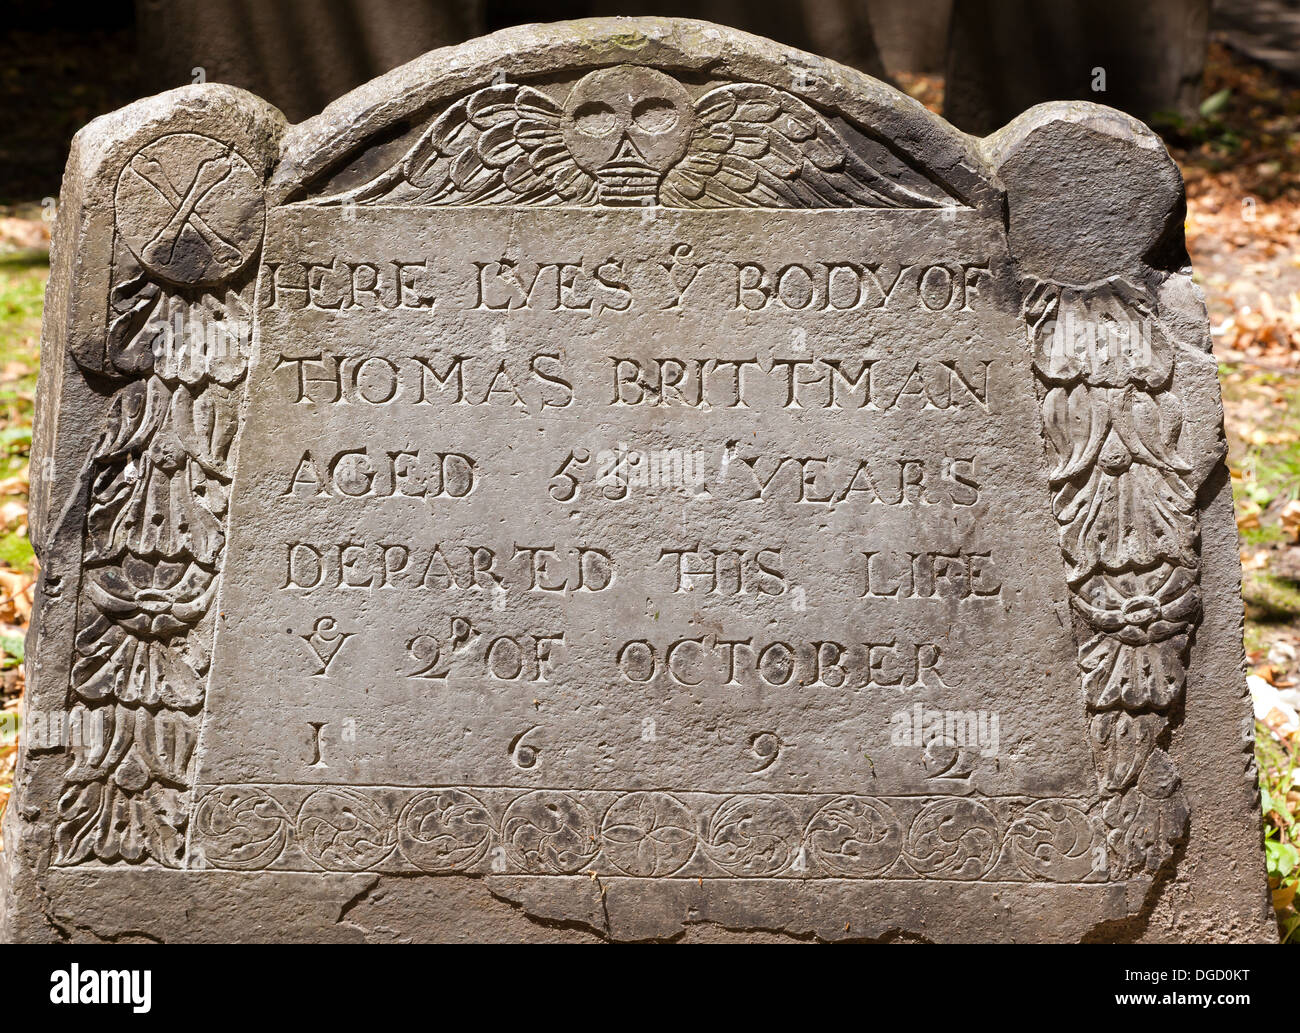 Close-up of an historic grave stone in King's Chapel Burying Ground,  commemorating  the death of  Thomas Brittman  in   1699 Stock Photo